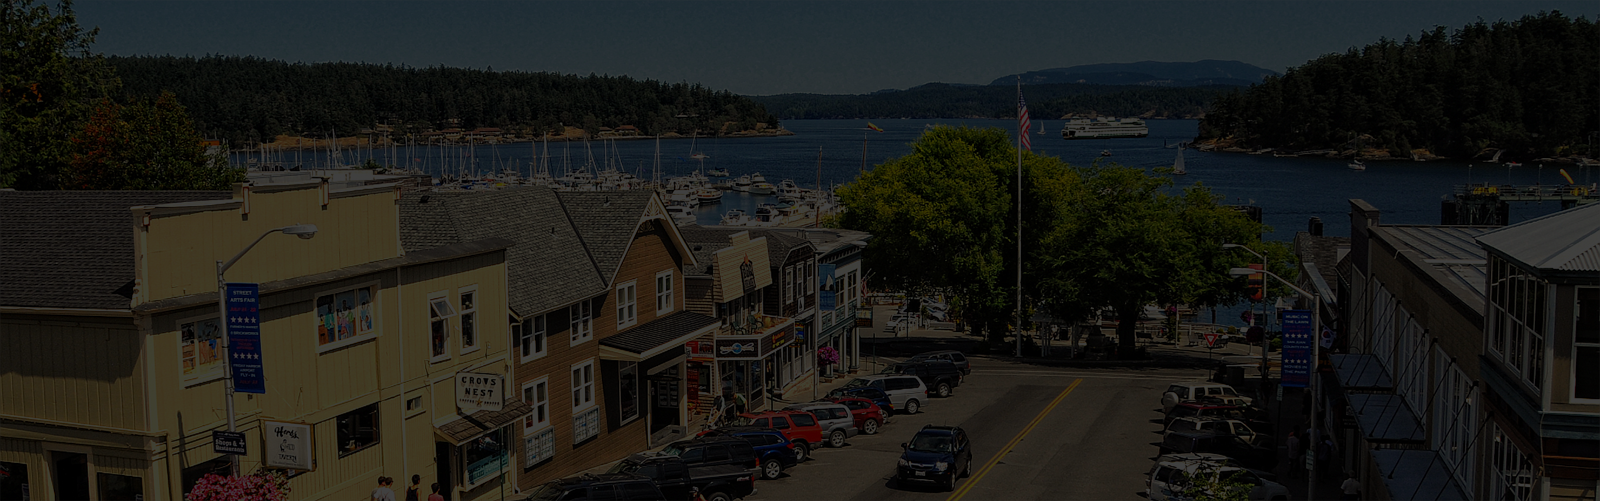 The Suites at Friday Harbor Case Study > Read More